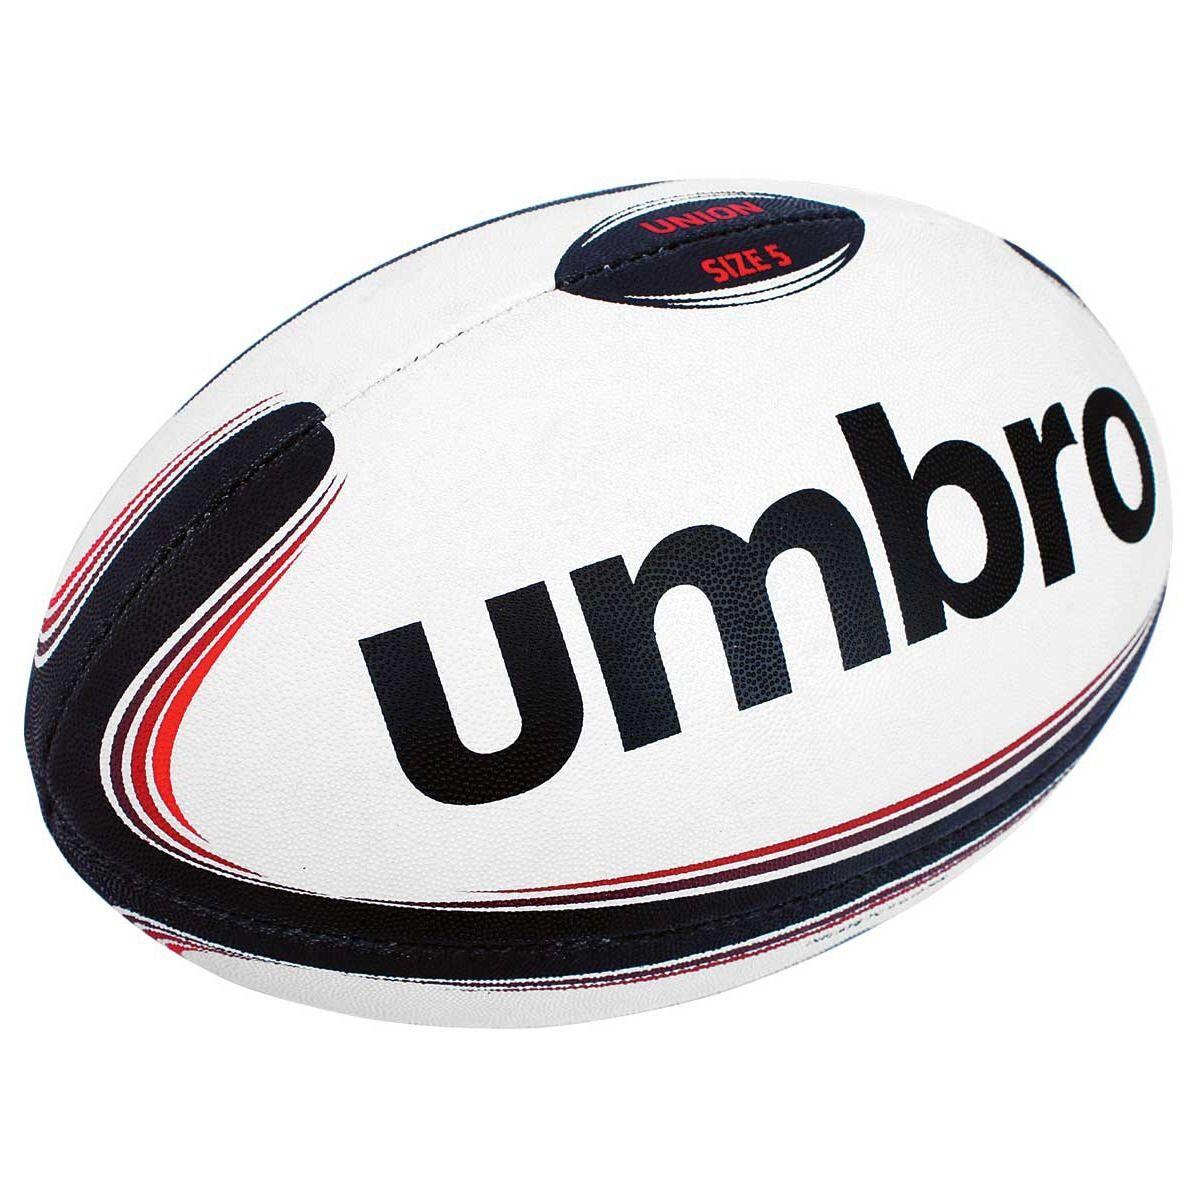 Umbro Training Rugby Ball Size 5 5/6